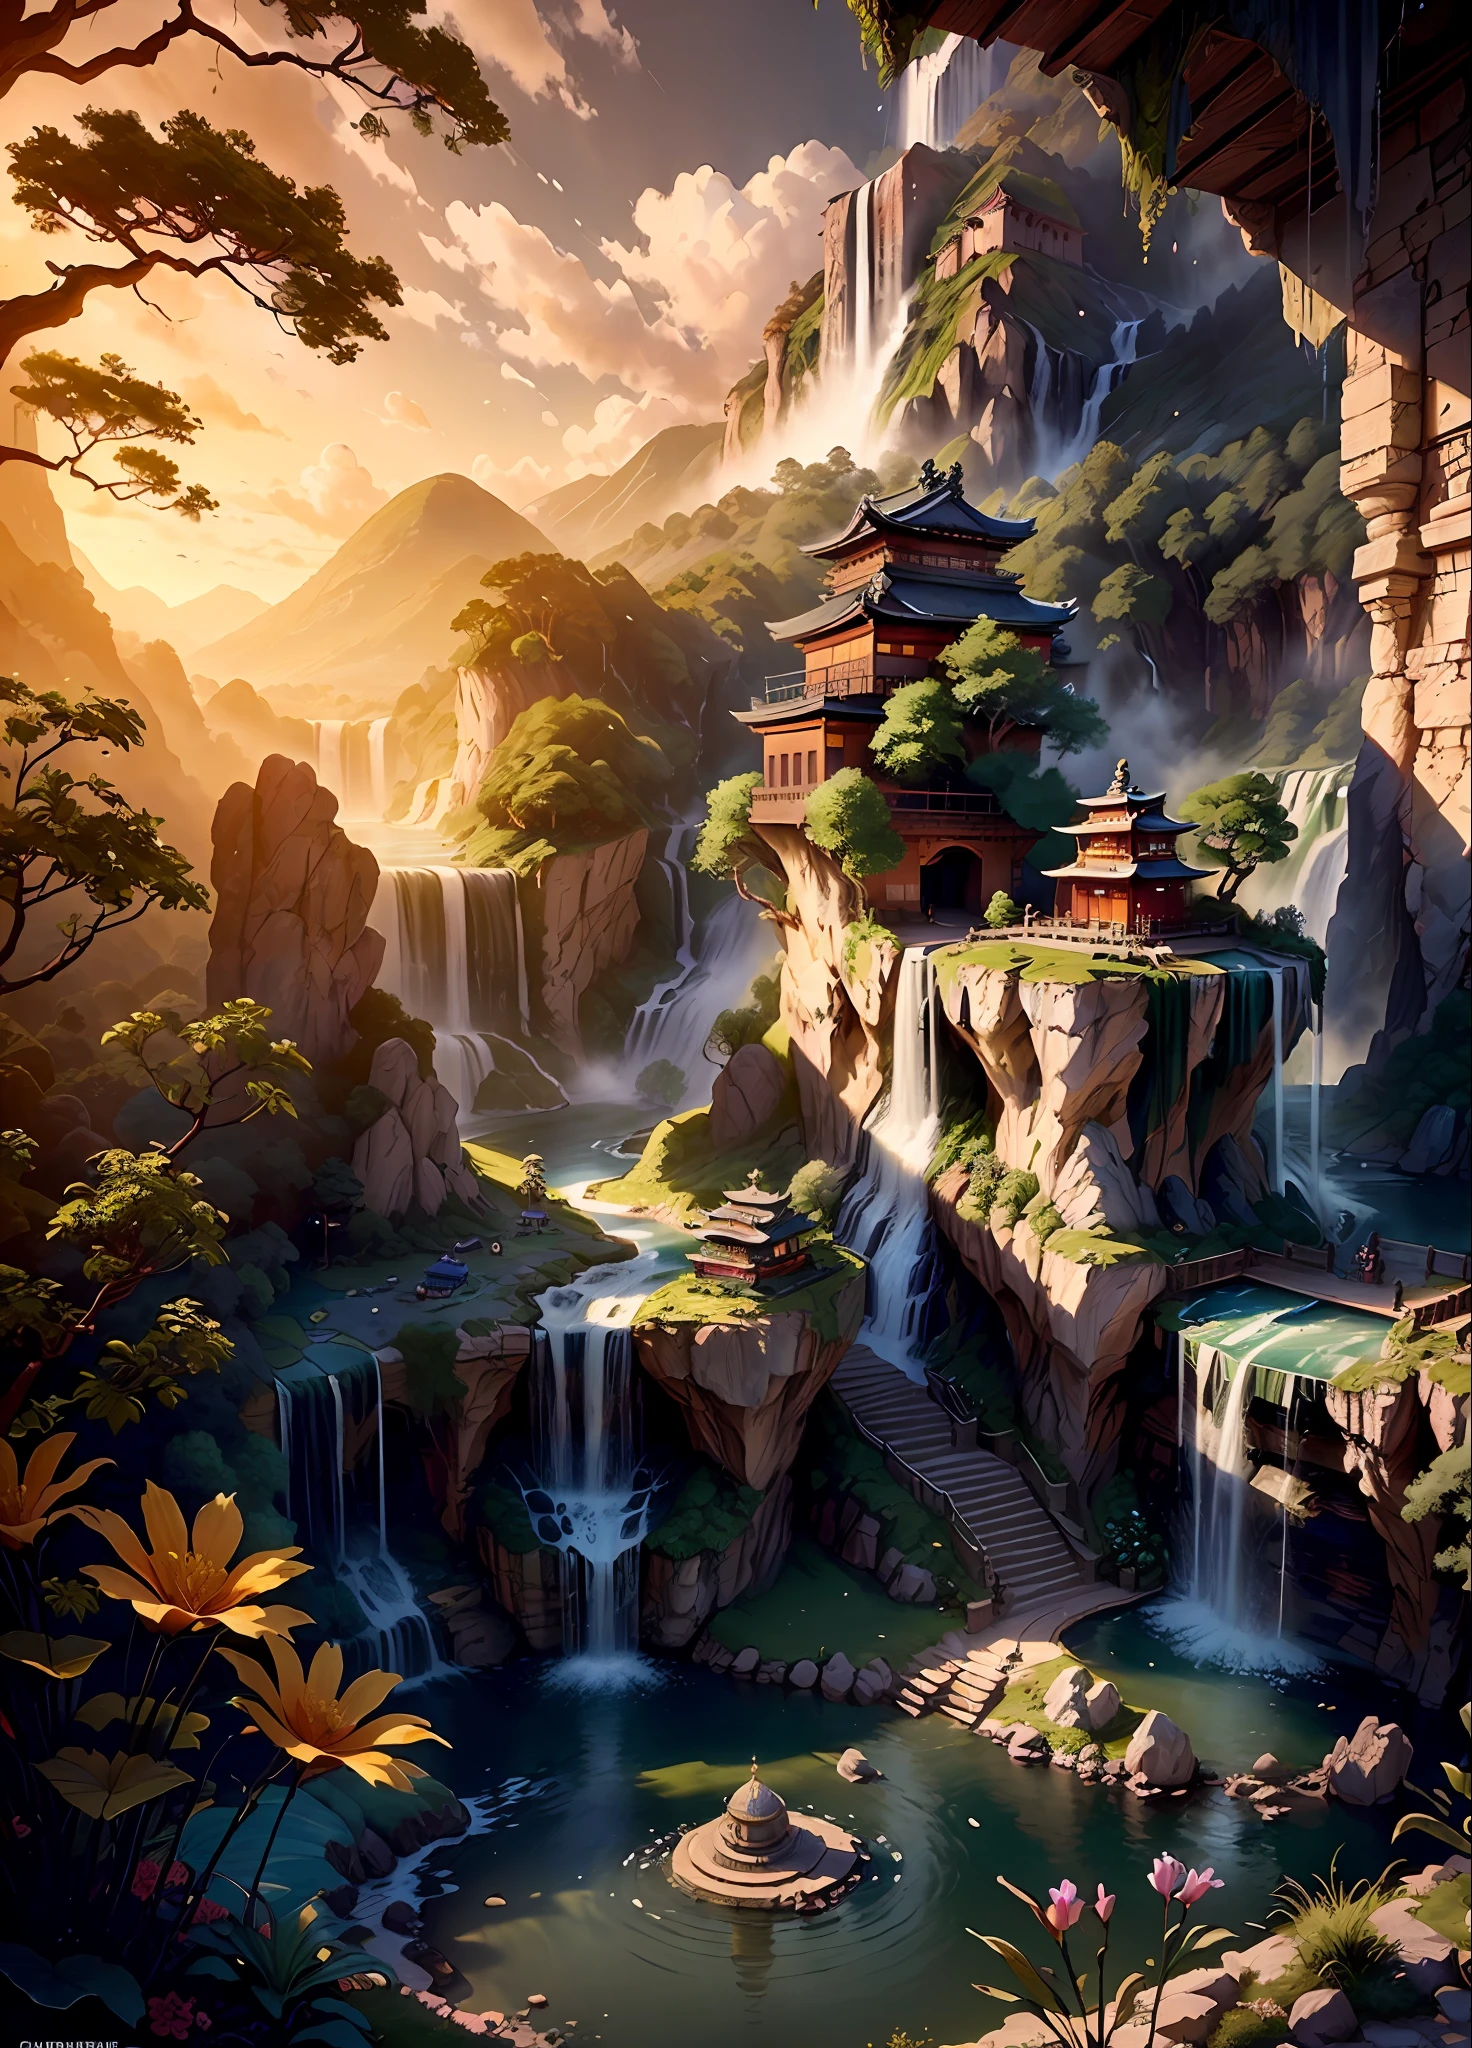 ((masterpiece)) picture of a fantastic valley scene evening time colorful sky,(orange colour theme),secret monastery in the valley , ((detail monastery)) ((small details)), (highly detailed valley) floral plant surrounding the monastery, inspired by senior environment artist, ((ancient japnese style monastery)), ((waterfall)) , (intricate details), ((ultra-hd))unreal engine (fantasy art),(( unreal engine)) render concept art, ornate one ancient tample ruins, ((monastery over the waterfall)), a bridge connect monastery to the forest,picture capture with each every (((small details))), ((highly detailed))